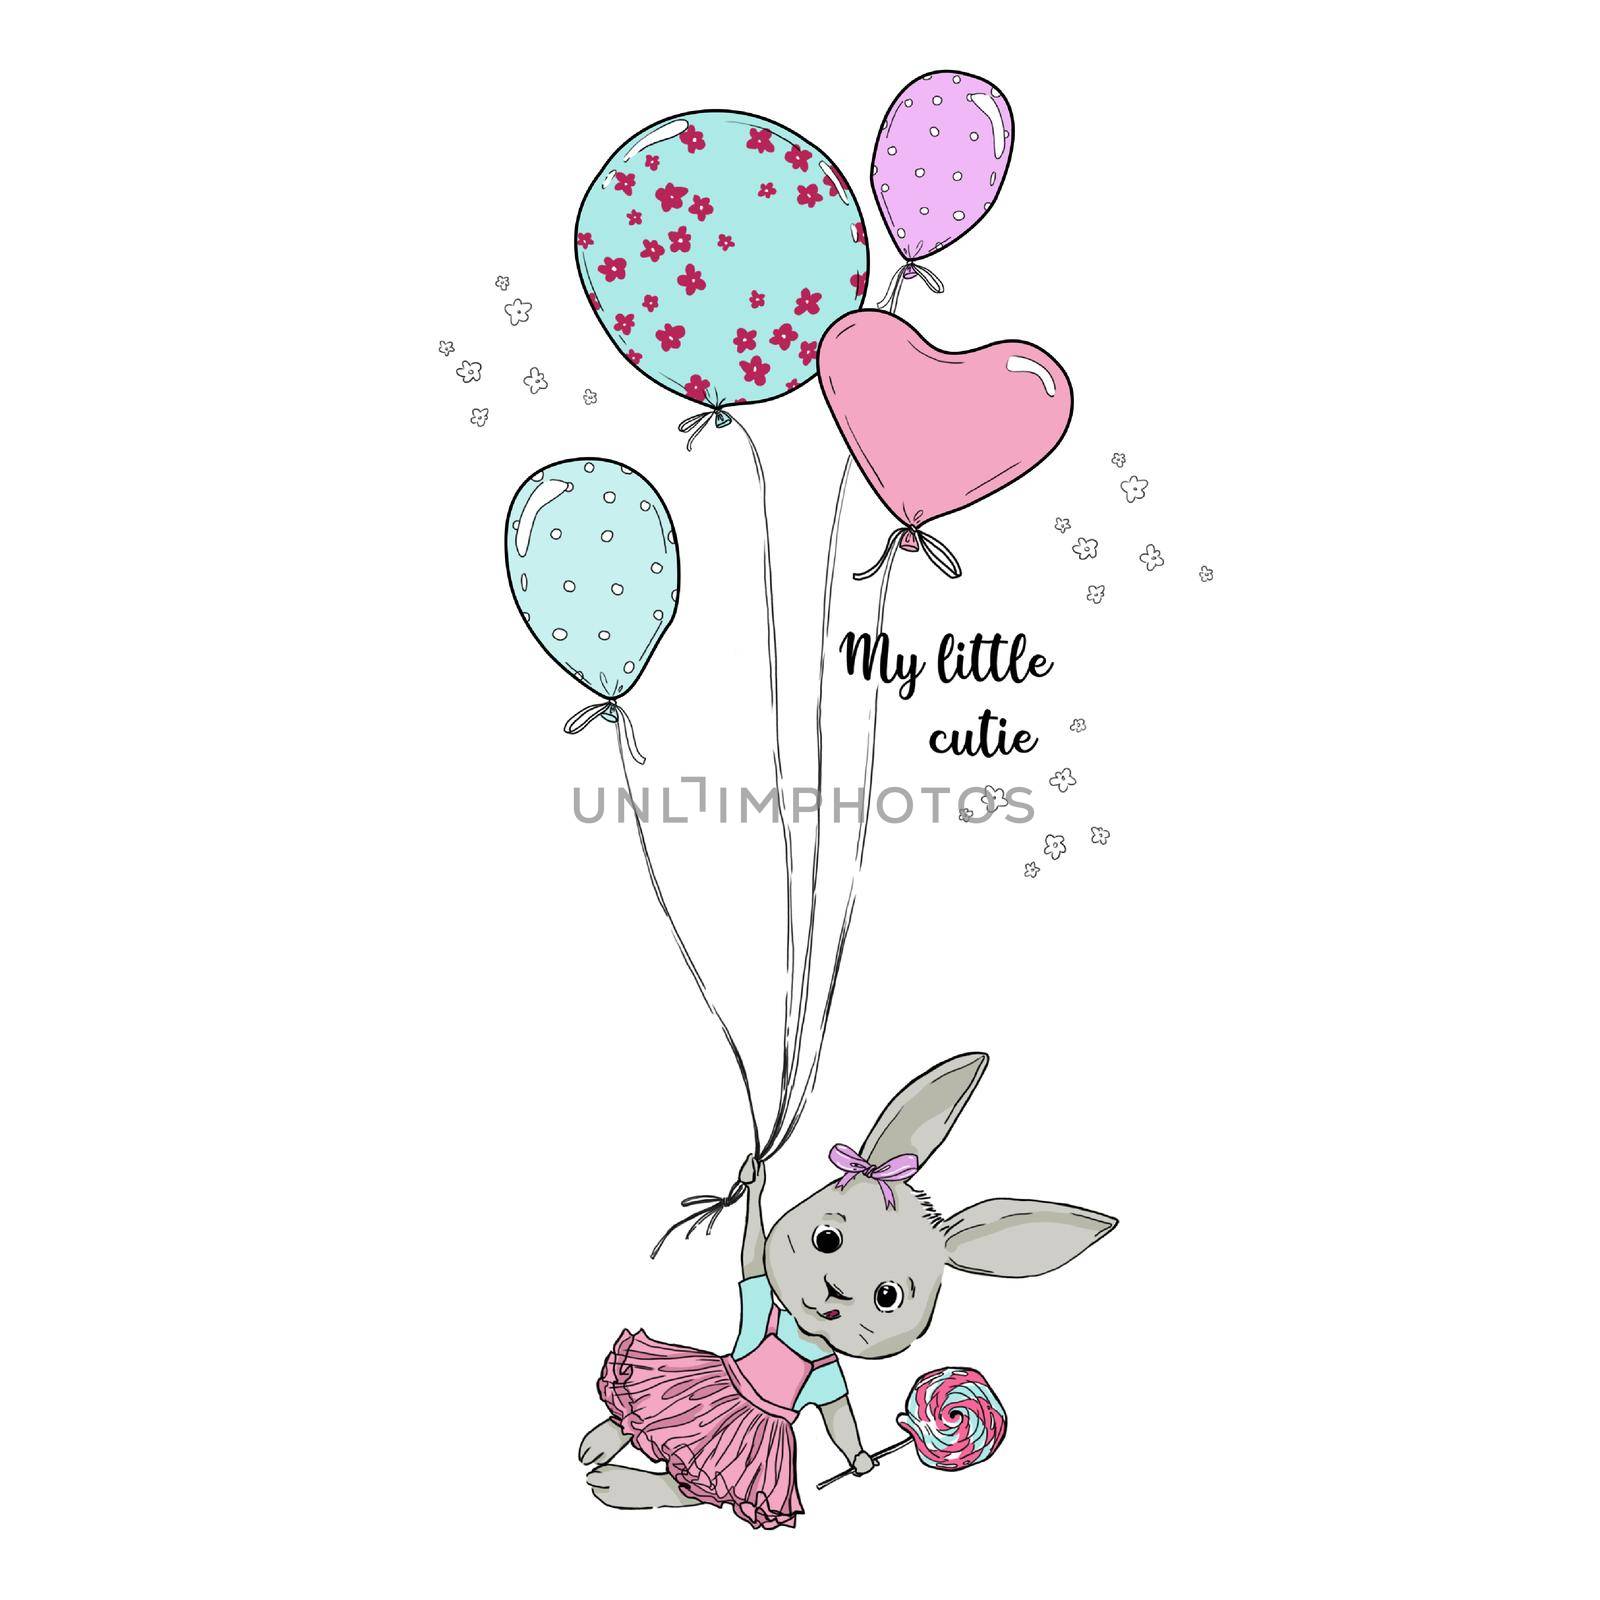 Cute hand drawing illustration with bunny and balloons by fireFLYart